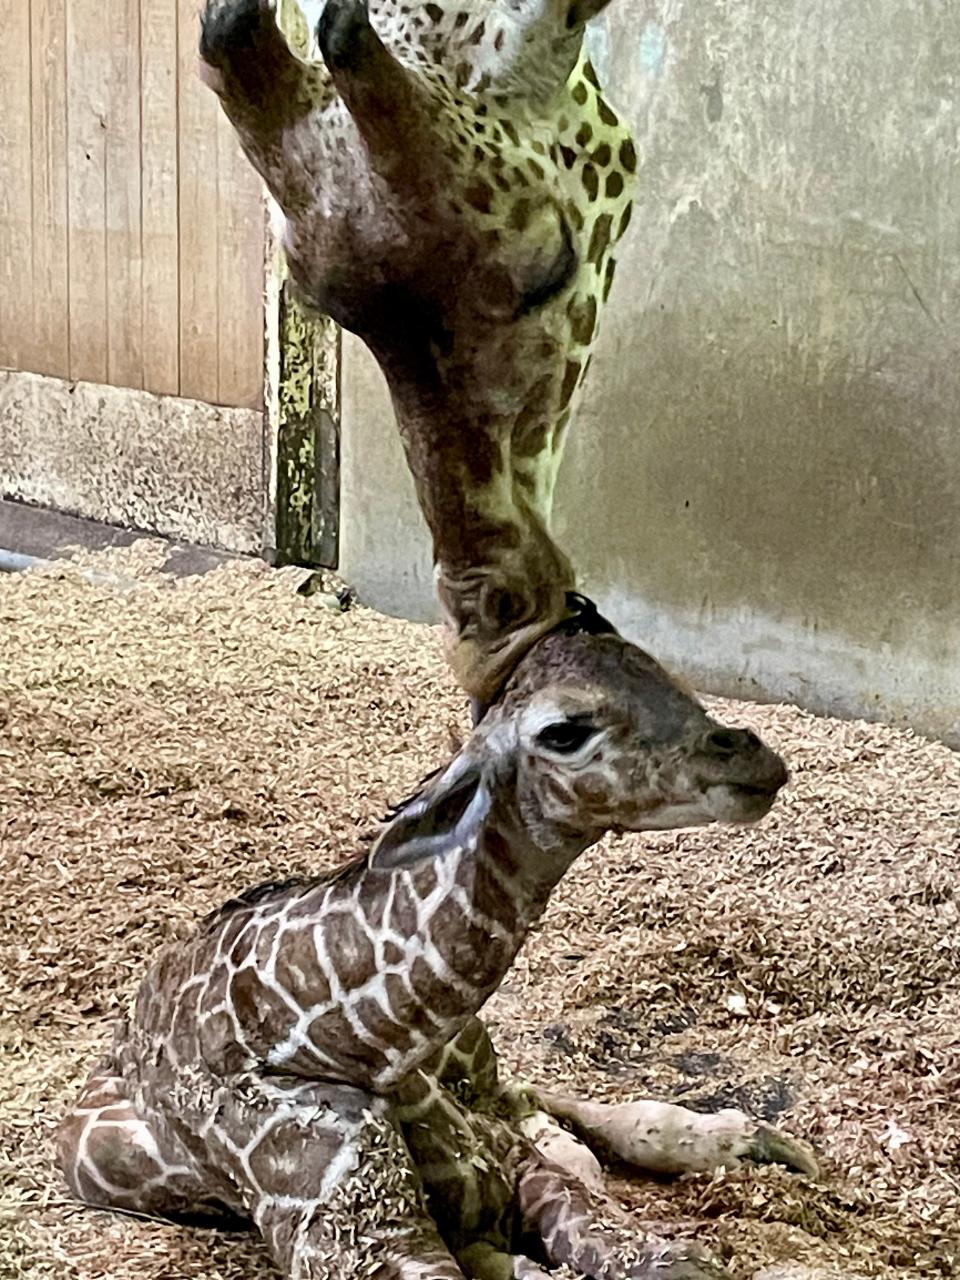 Fitz, the baby reticulated giraffe born at the Memphis Zoo on April 2, gets a nuzzle from his mom, Wendy. Fitz is Wendy's fourth calf and was born weighing 150 pounds.